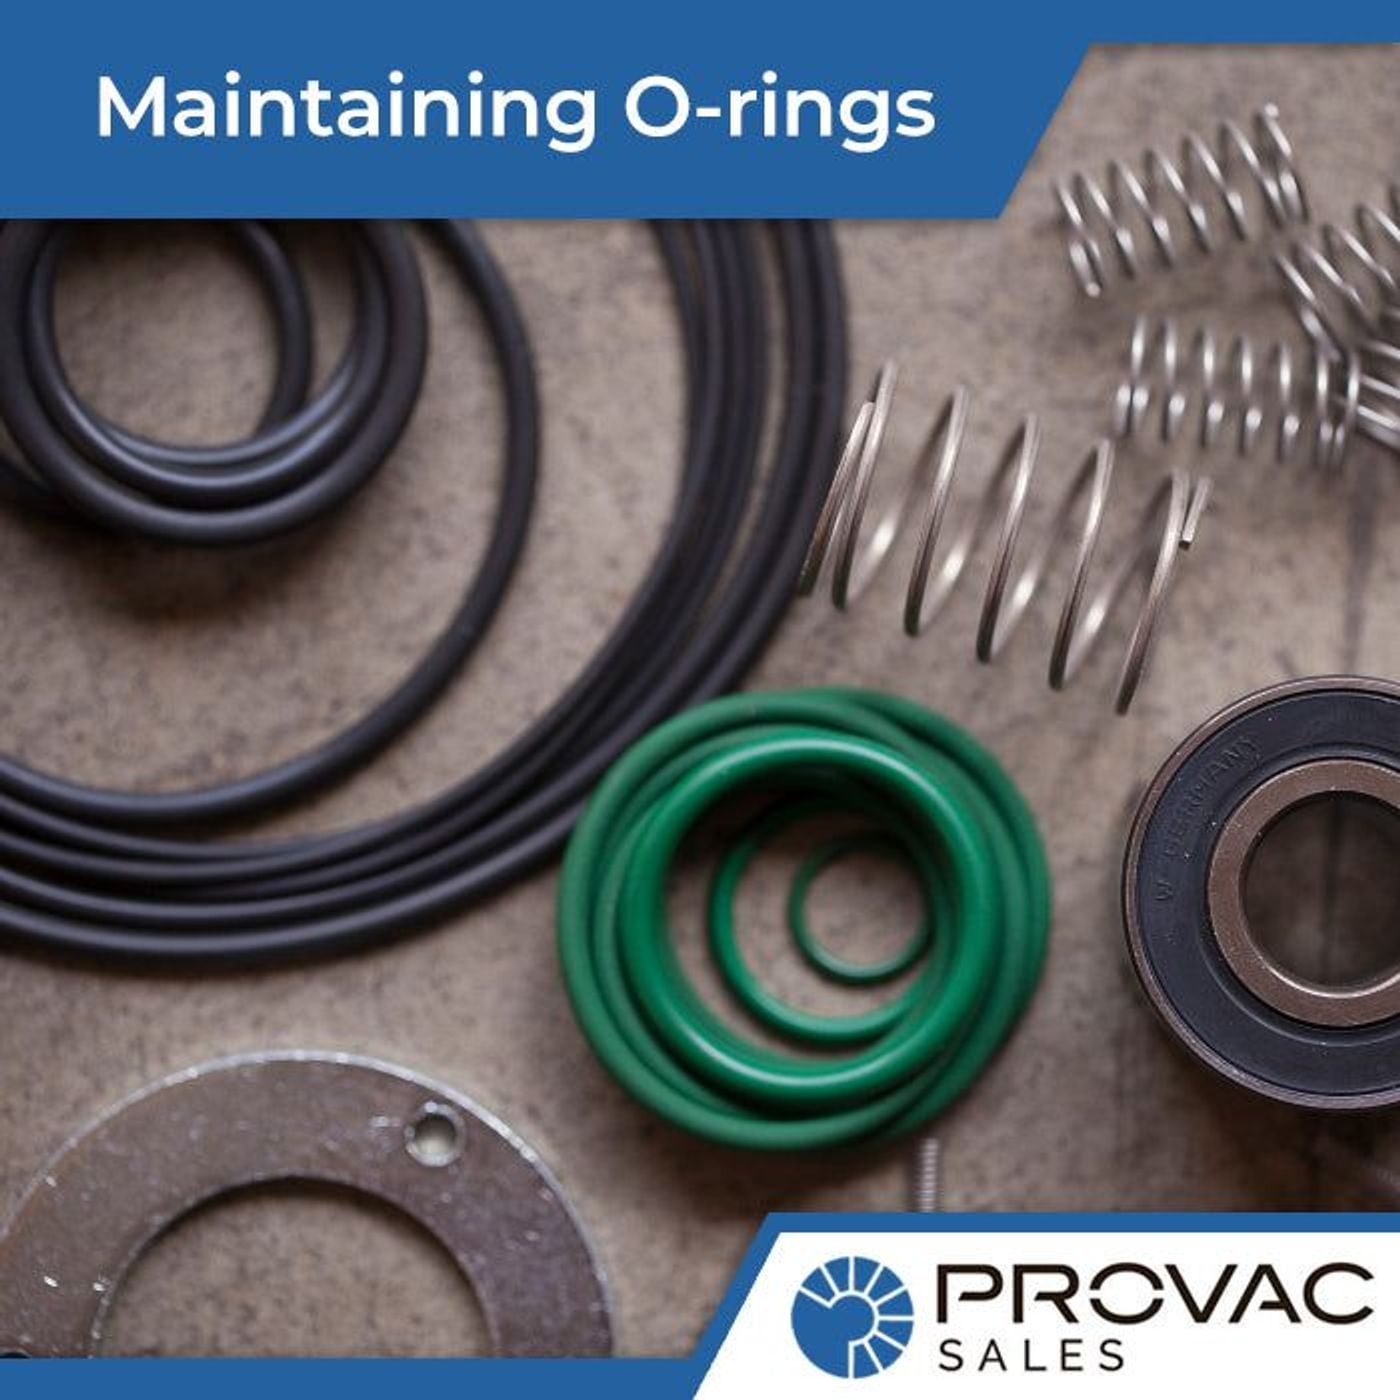 Color Cap Insert for RingSeal Cryogenic Vials with O-Ring Seal